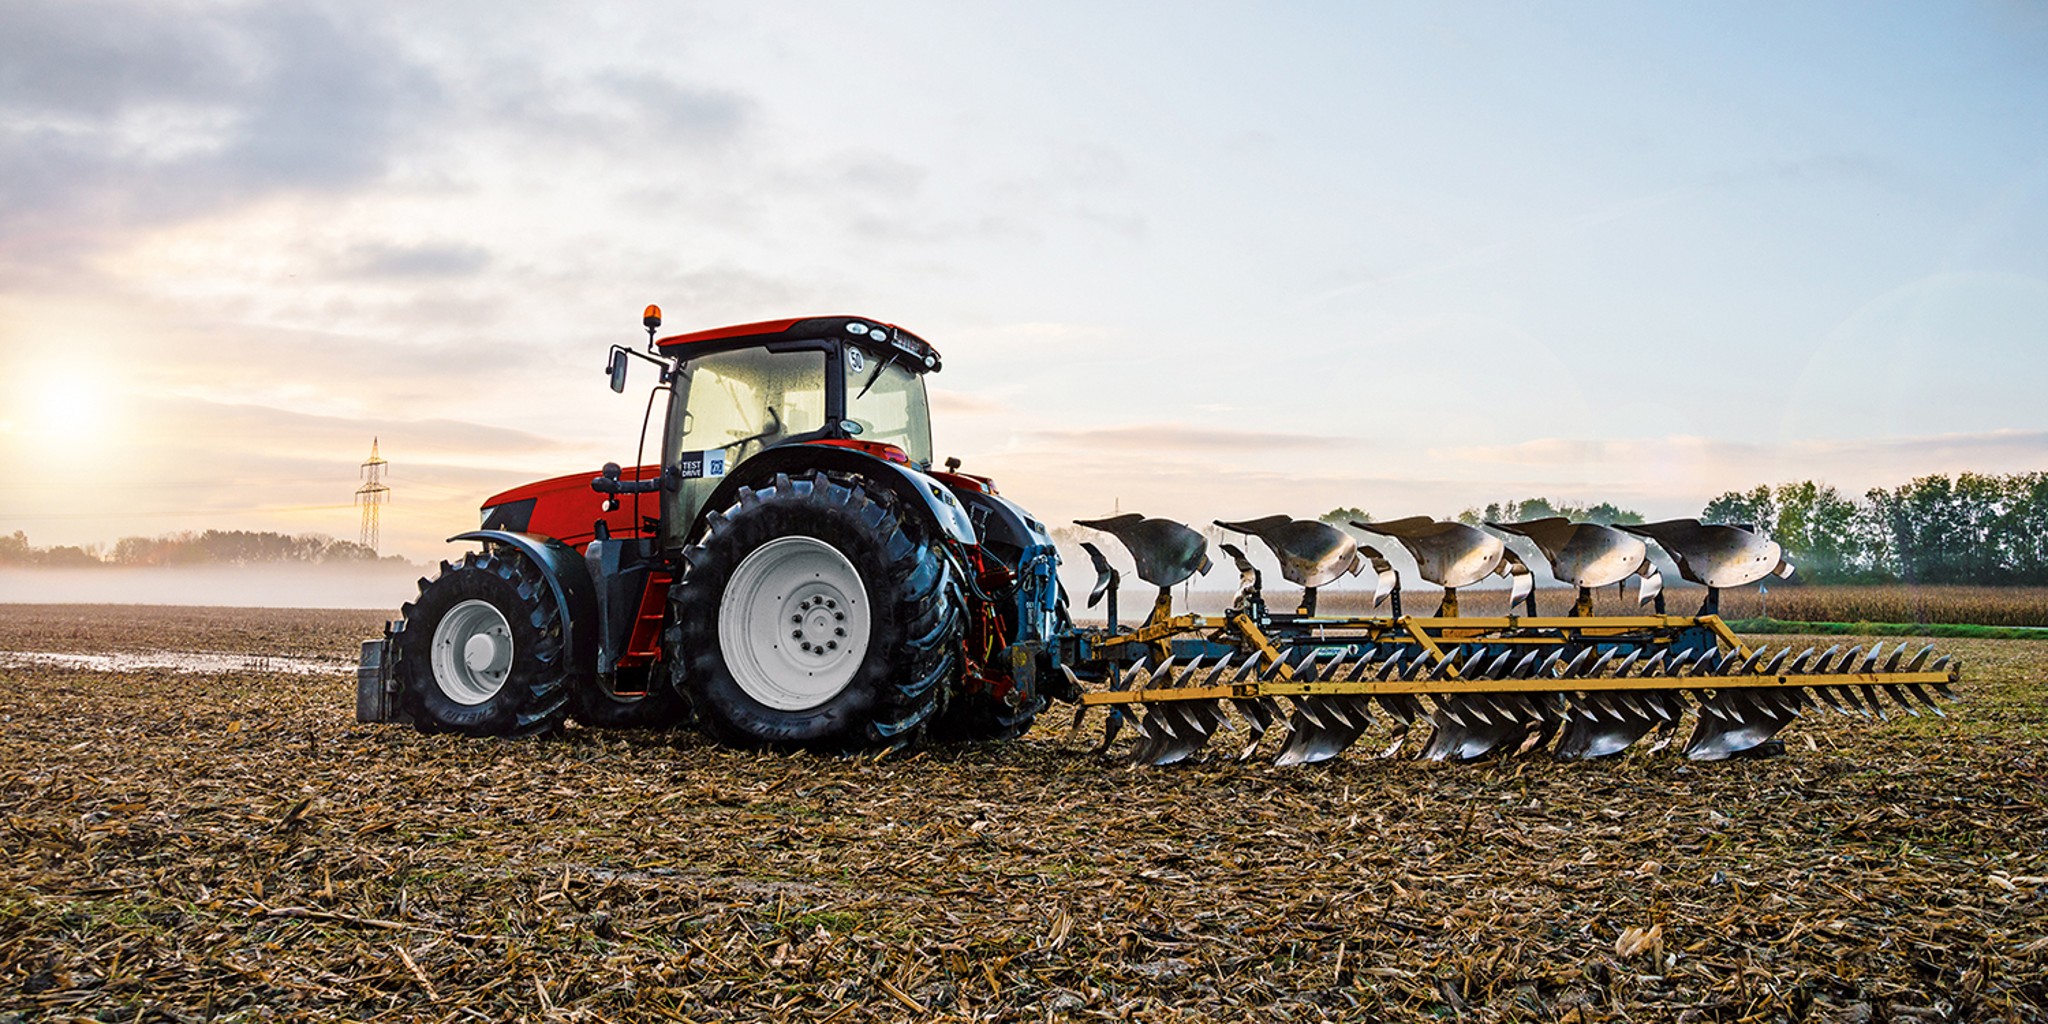 Smart farming: The future of agriculture